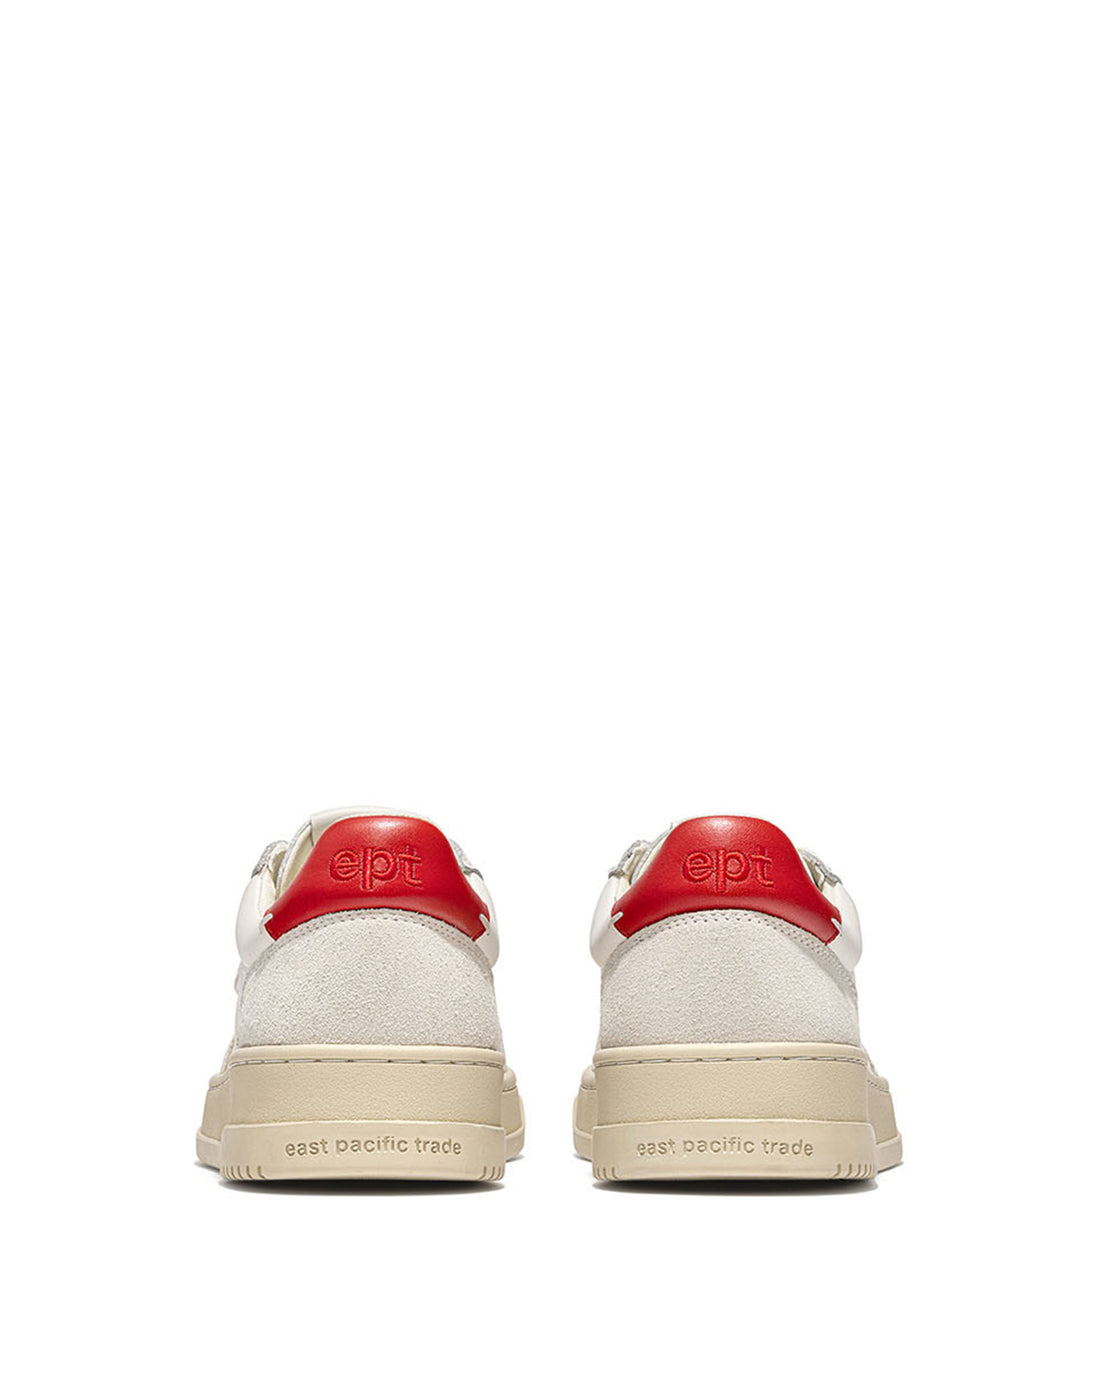 EPT Sneakers Court Suede Off White/Tofu/Red